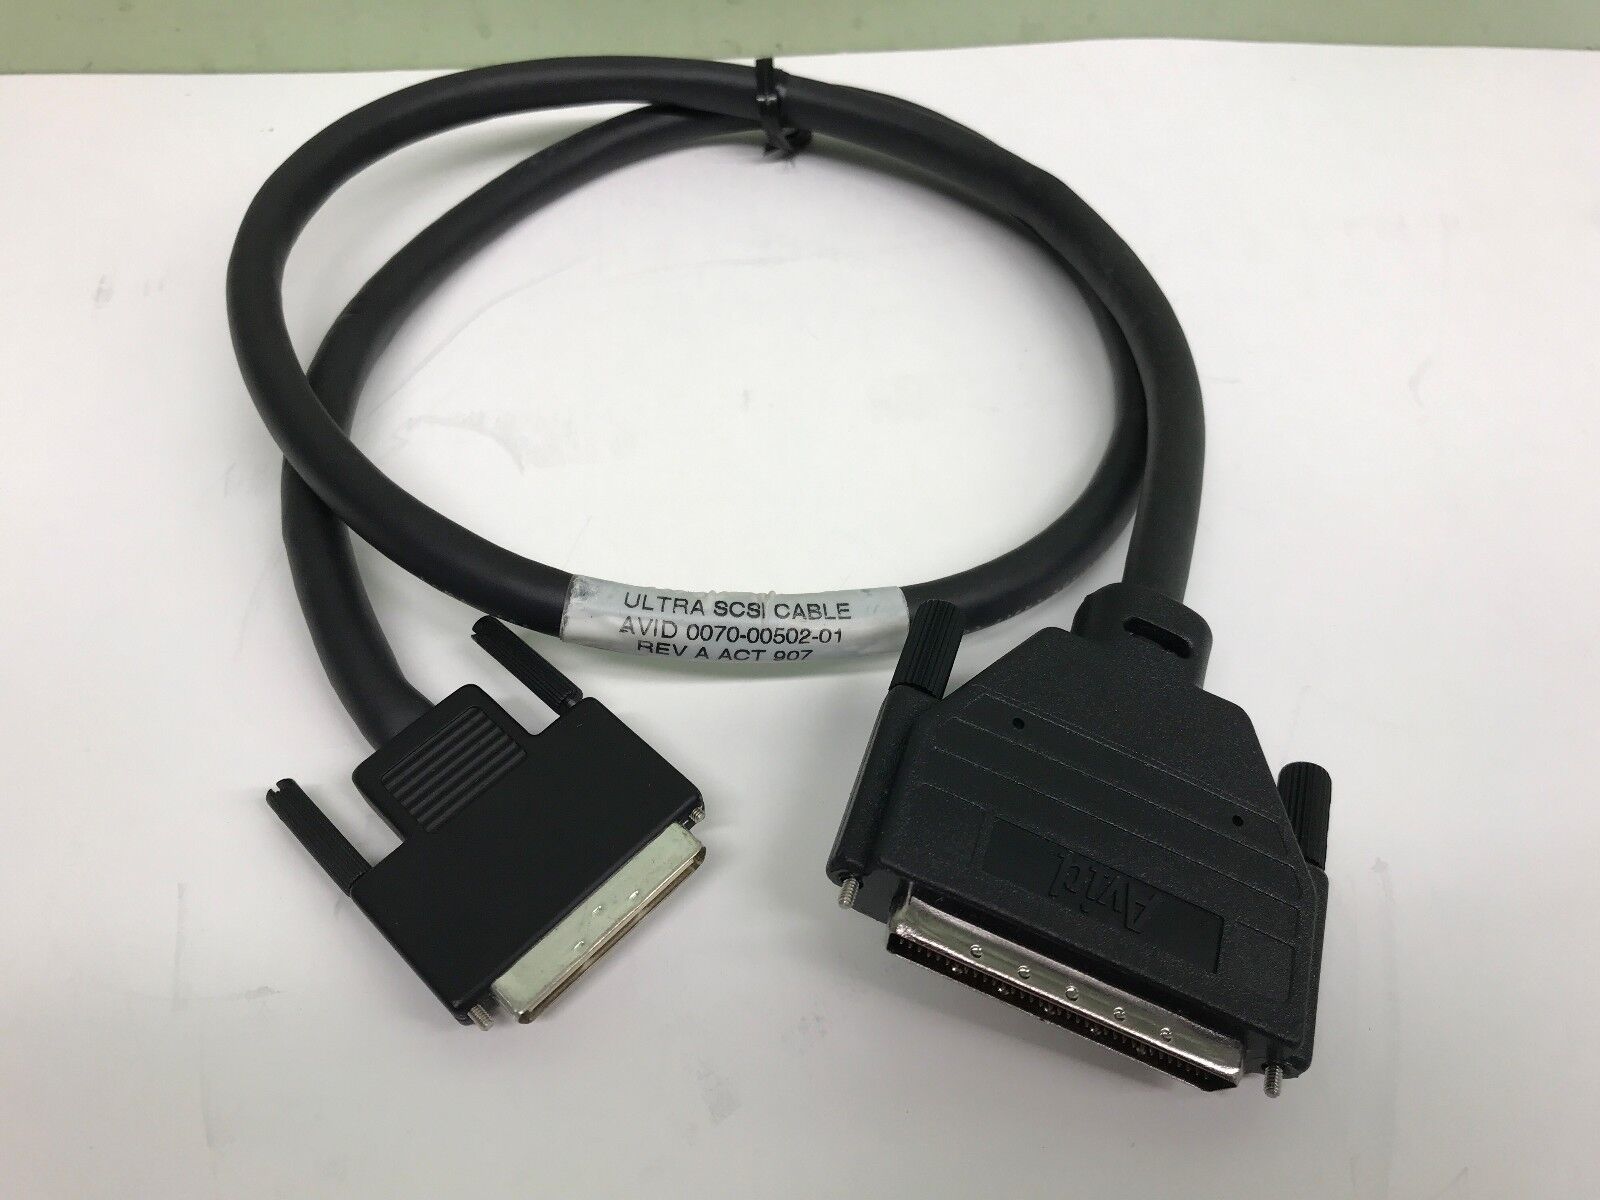 Avid 0070-00502-01 40in Cable with VHDCI-68HD SCSI Connectors for U160 SE Mode 